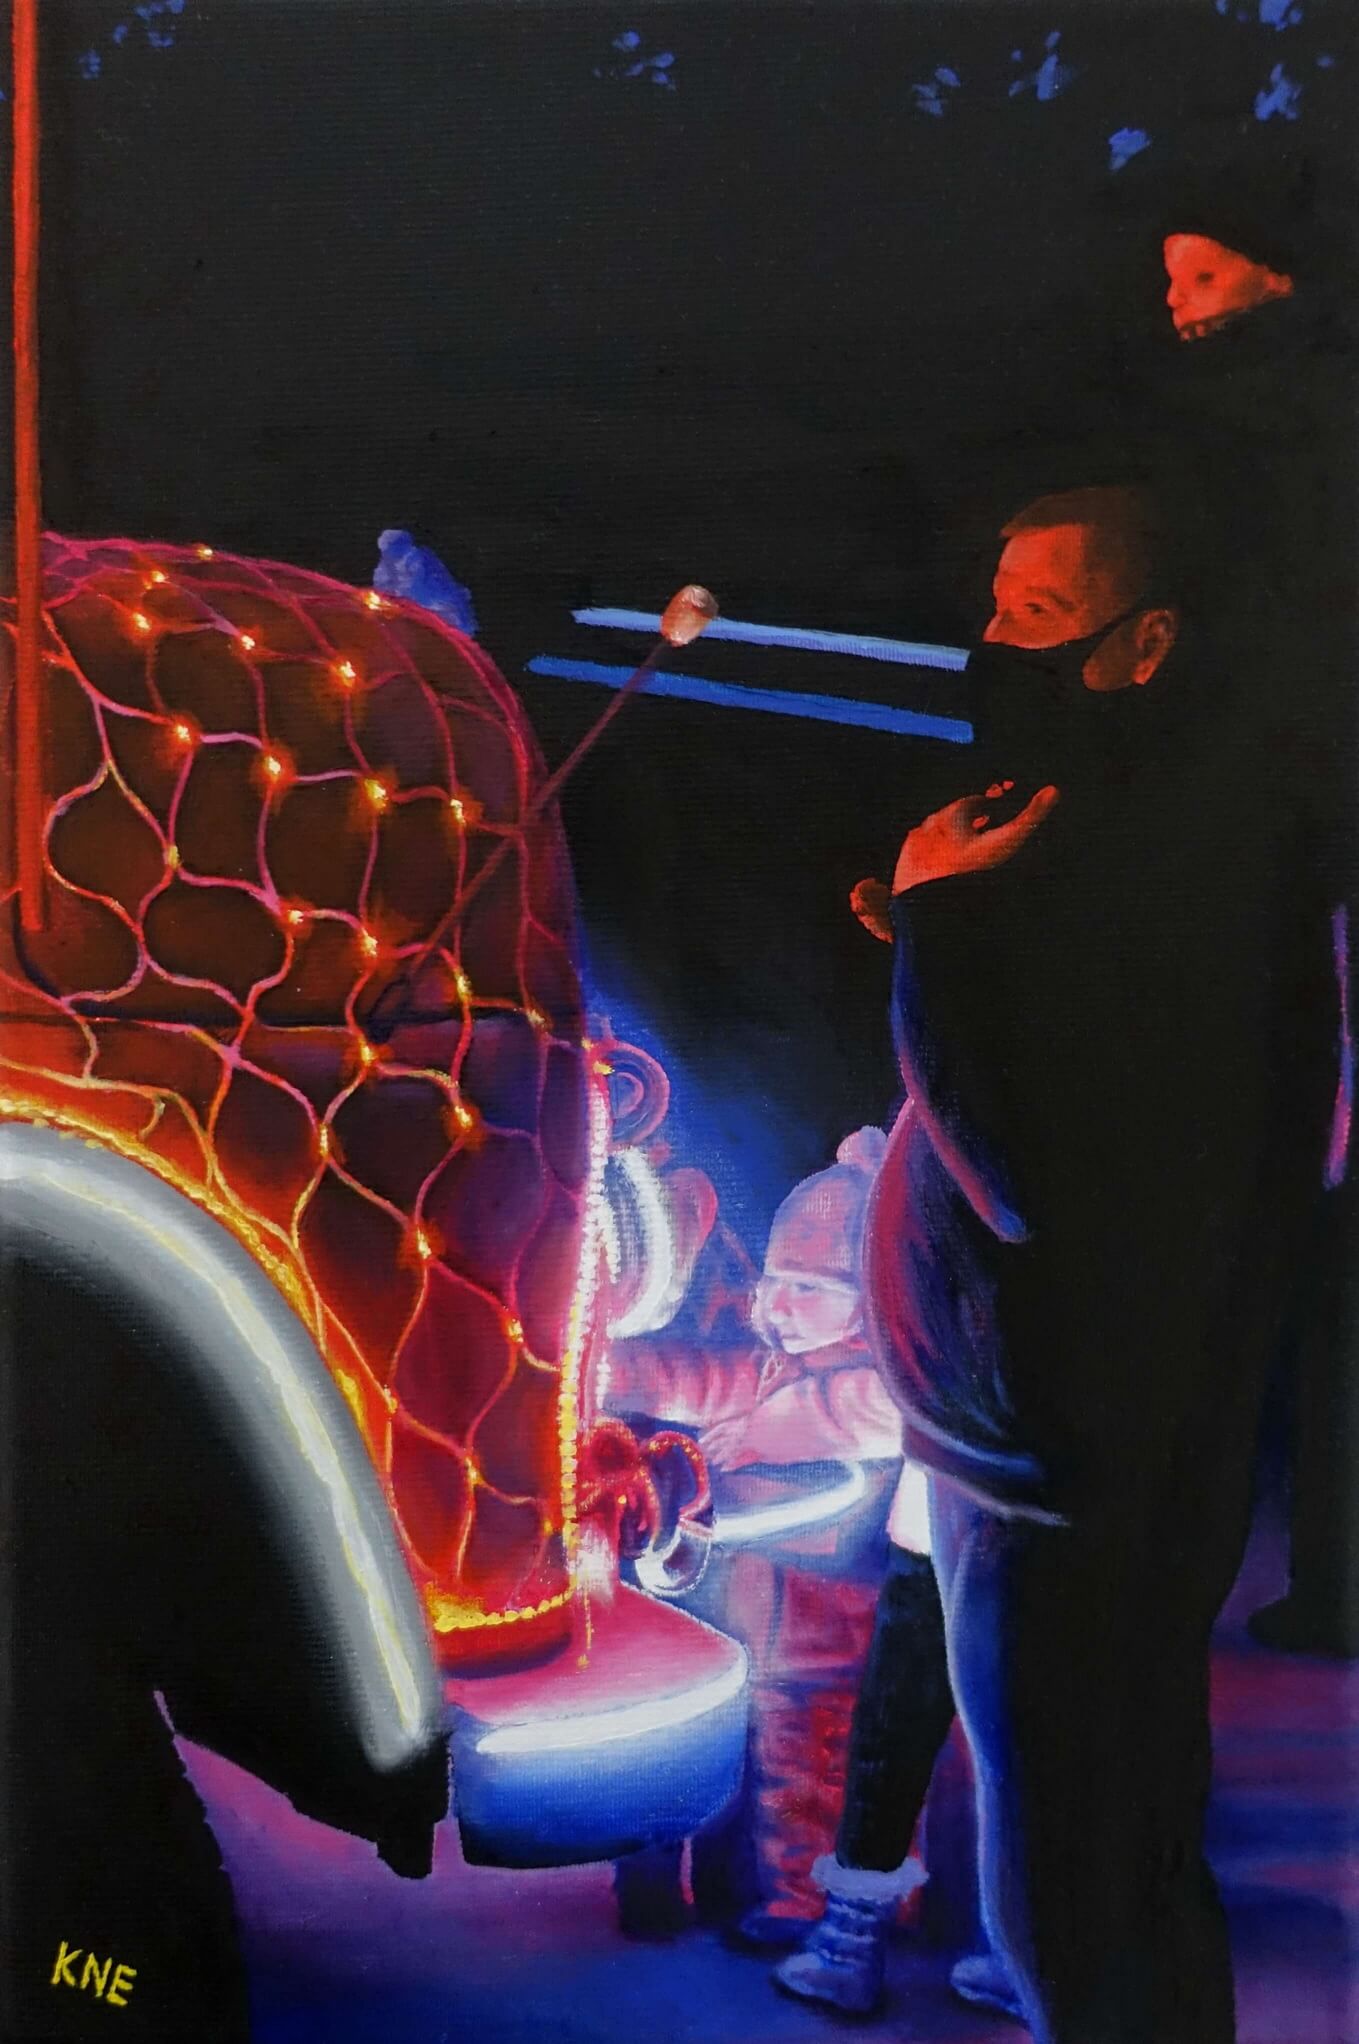 Glowing of the Festive Fire Truck painting